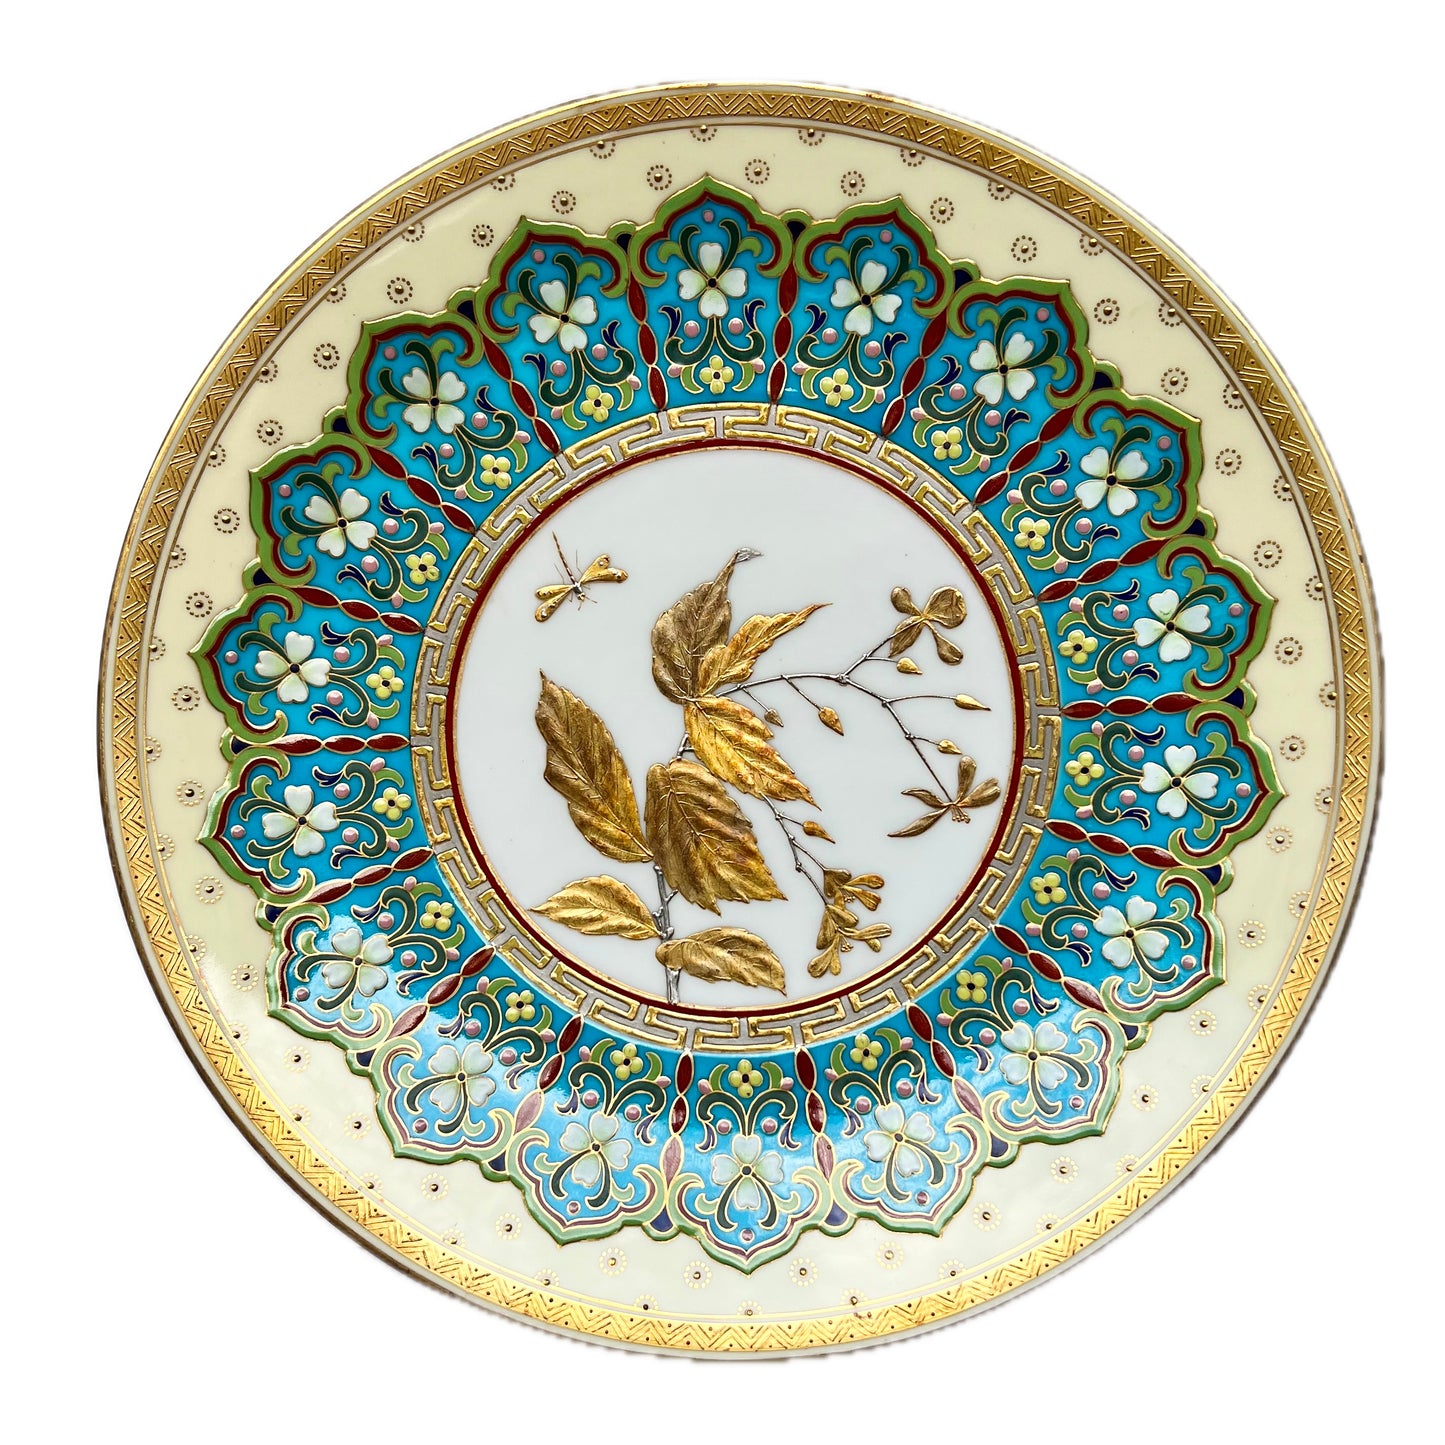 Late 19th century Minton hand-painted porcelain plate featuring an intriguing blend of Aesthetic Movement and Orientalist influences